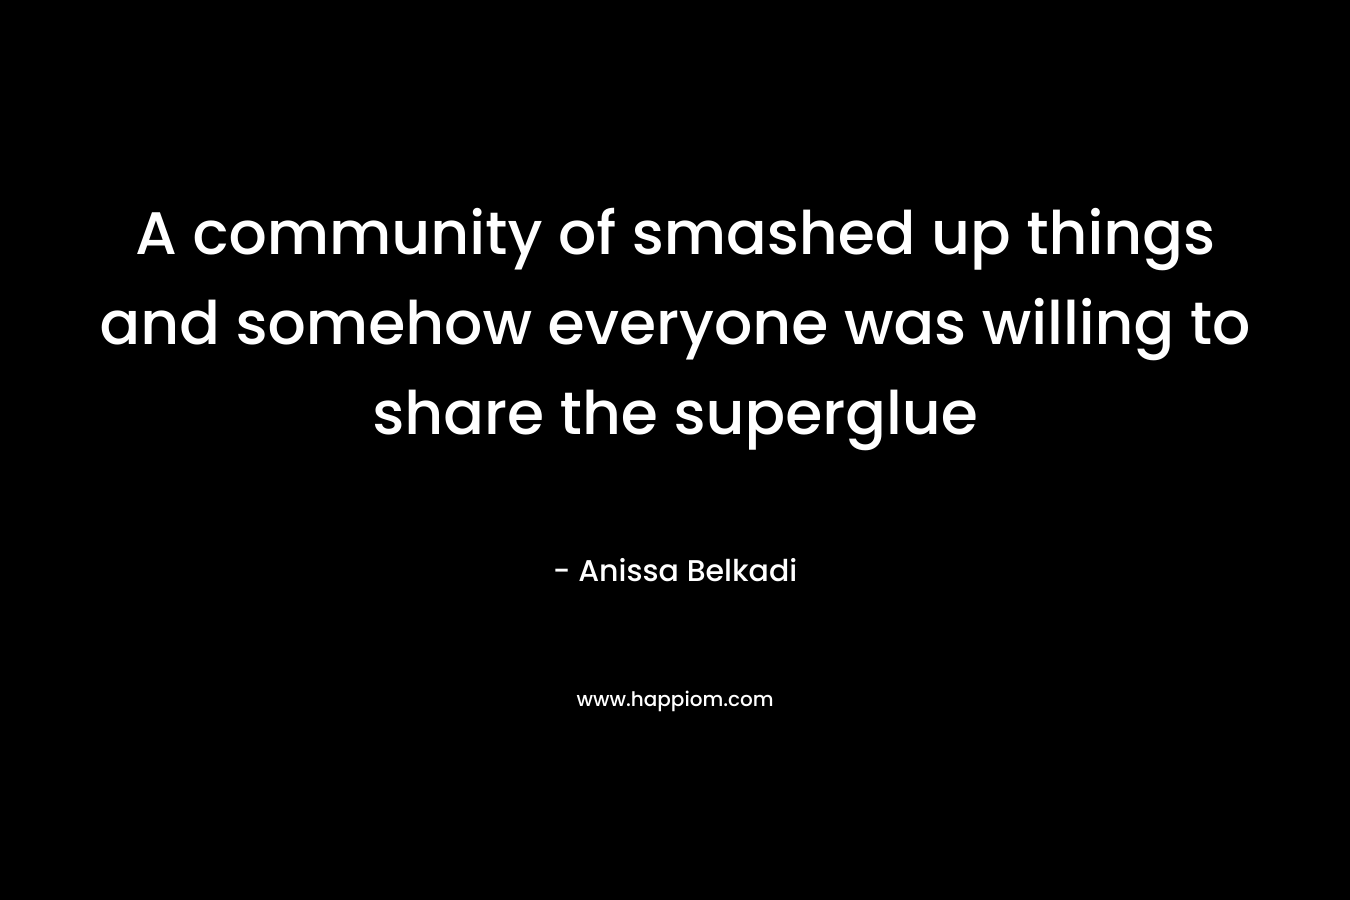 A community of smashed up things and somehow everyone was willing to share the superglue – Anissa Belkadi